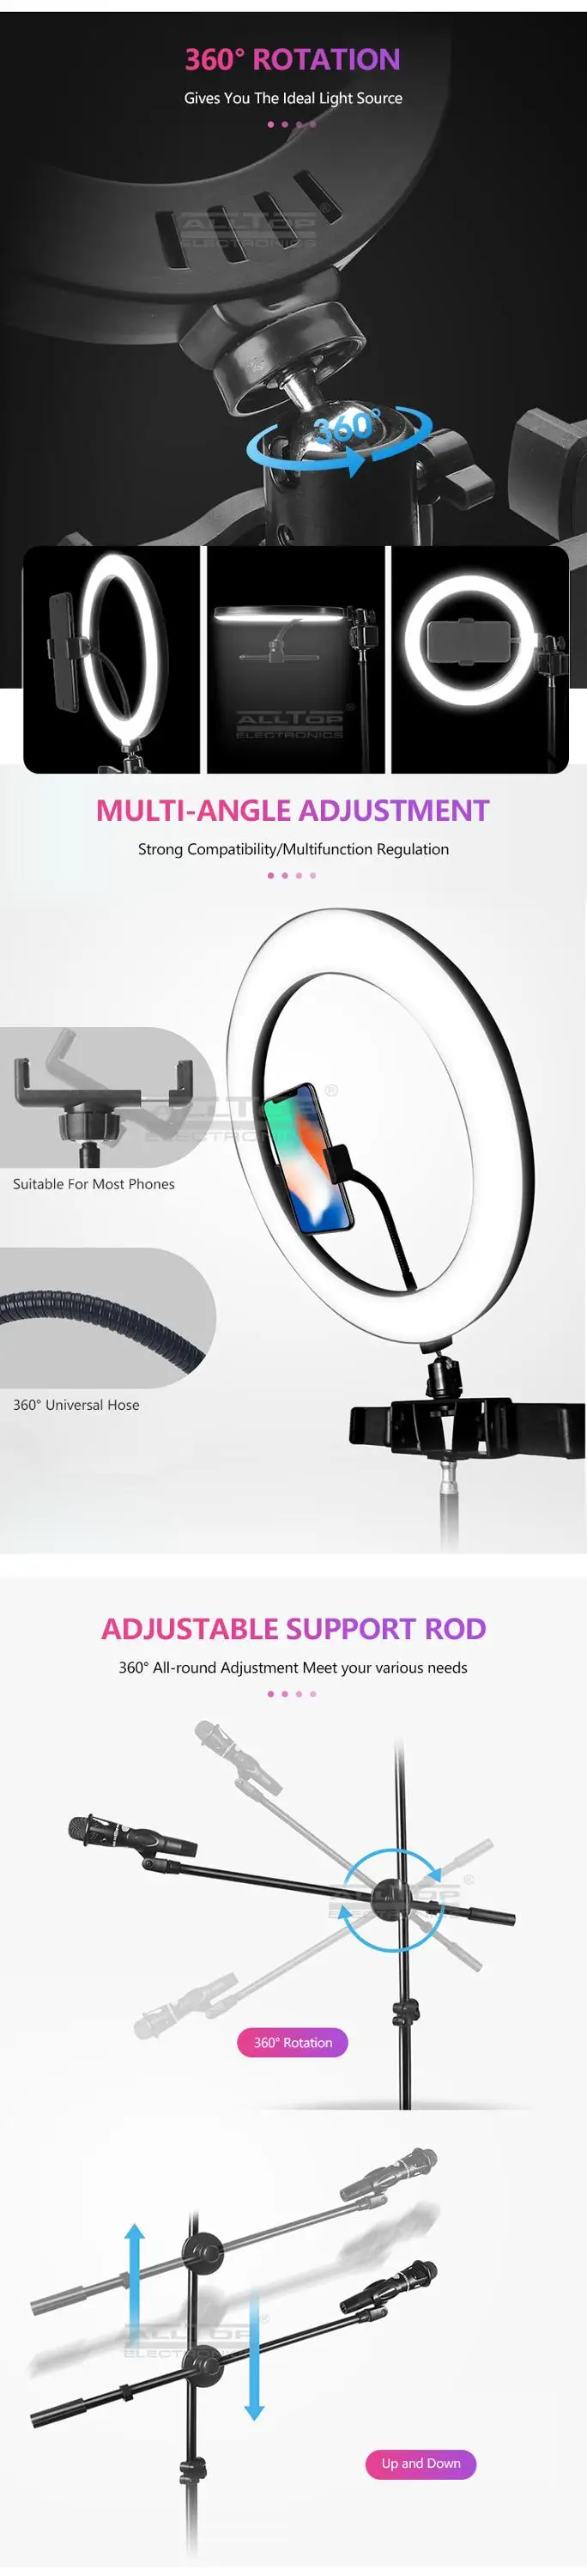 ALLTOP Photographic Light Phone Led Video Ring Light with Tripod Stand Camera Circle Selfie Led Ring Light